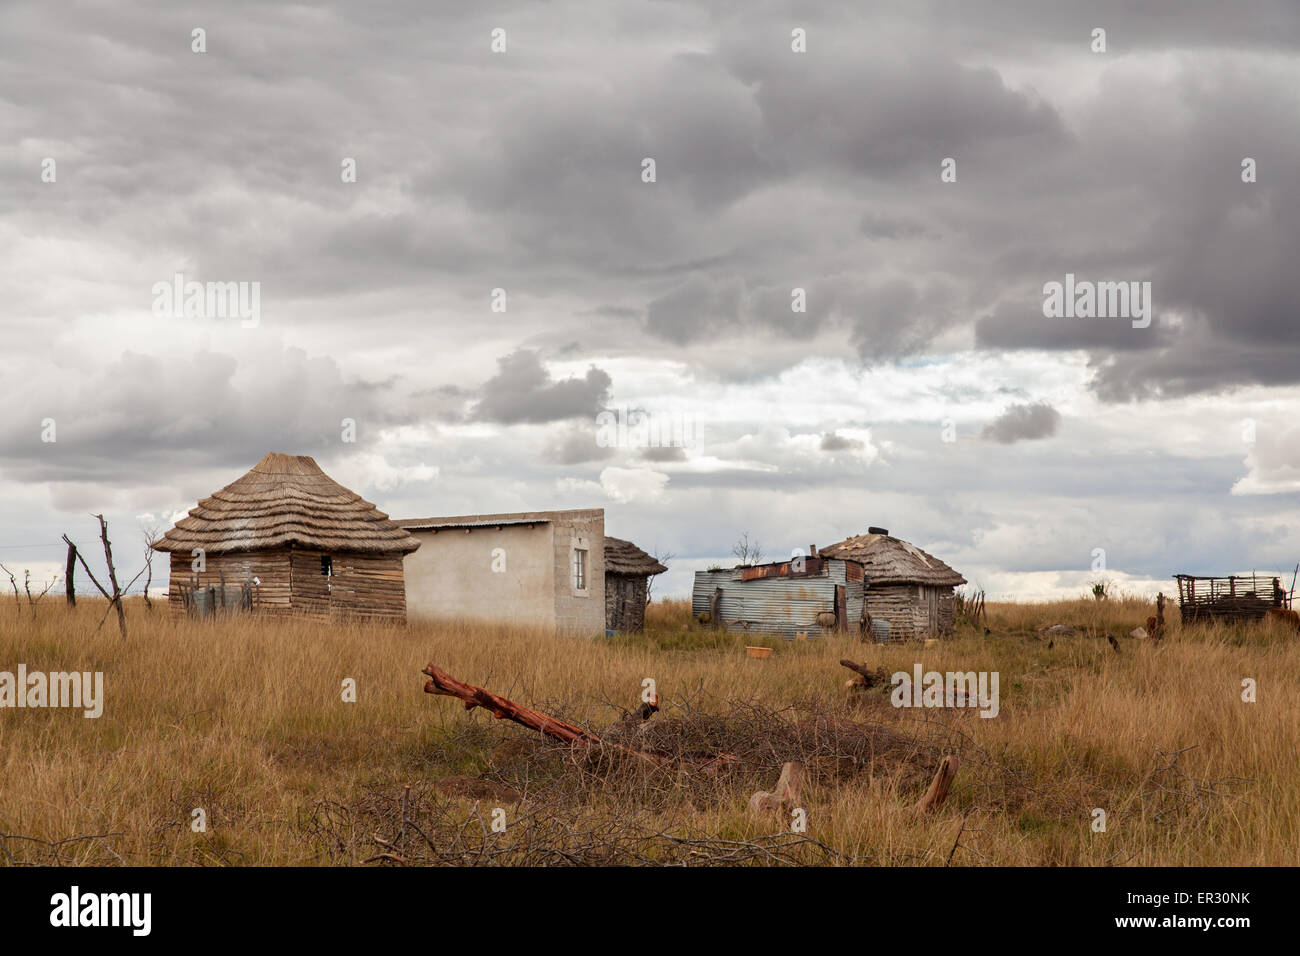 An abandoned farm in the grasslands of Swaziland, Africa with storm clouds overhead. Stock Photo